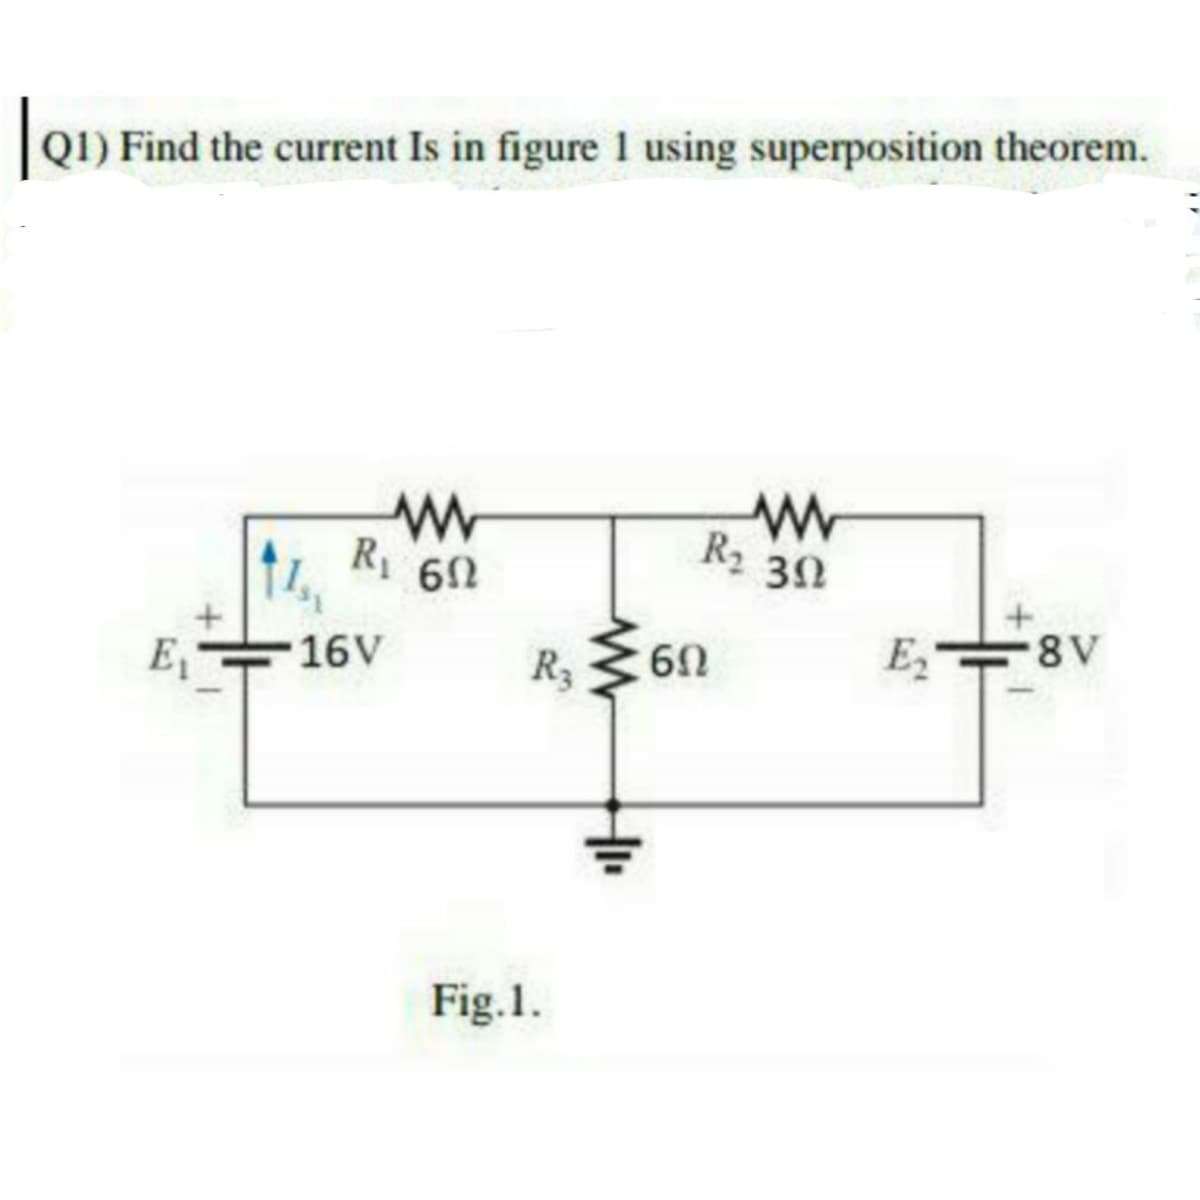 Q1) Find the current Is in figure 1 using superposition theorem.
R1
R2
3Ω
16V
E2
8V
E,
R3
Fig.1.
